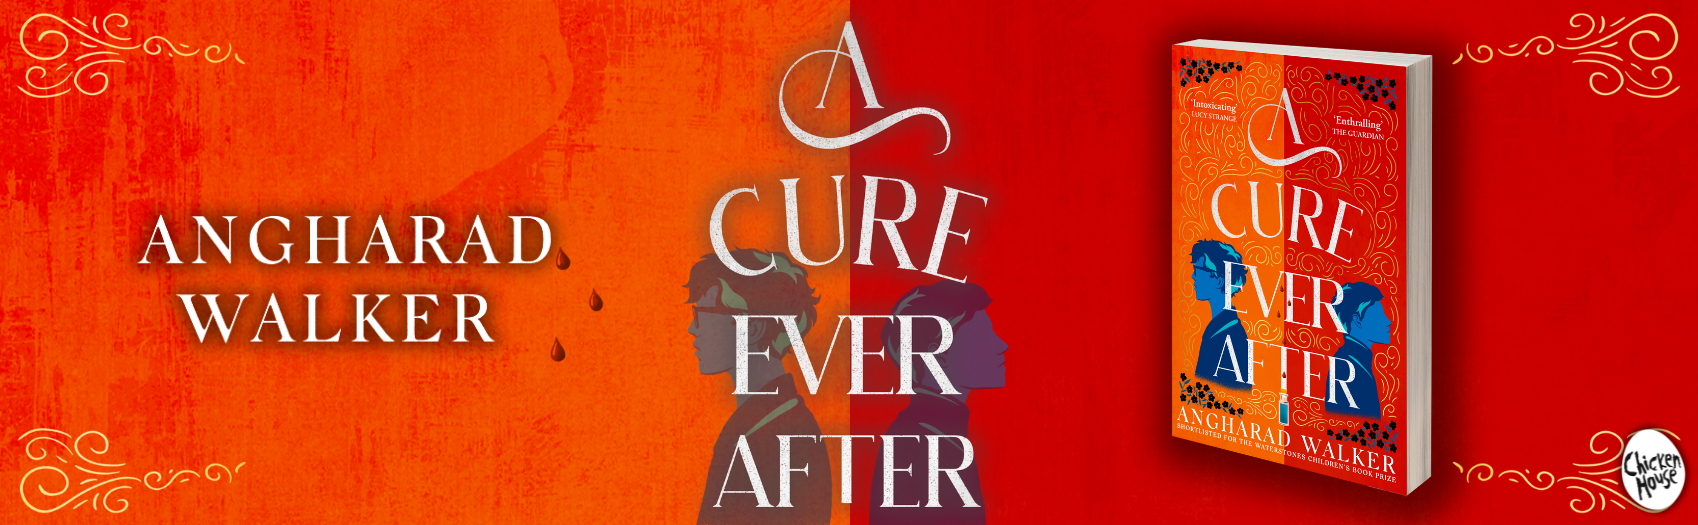 A CURE EVER AFTER by Angharad Walker 